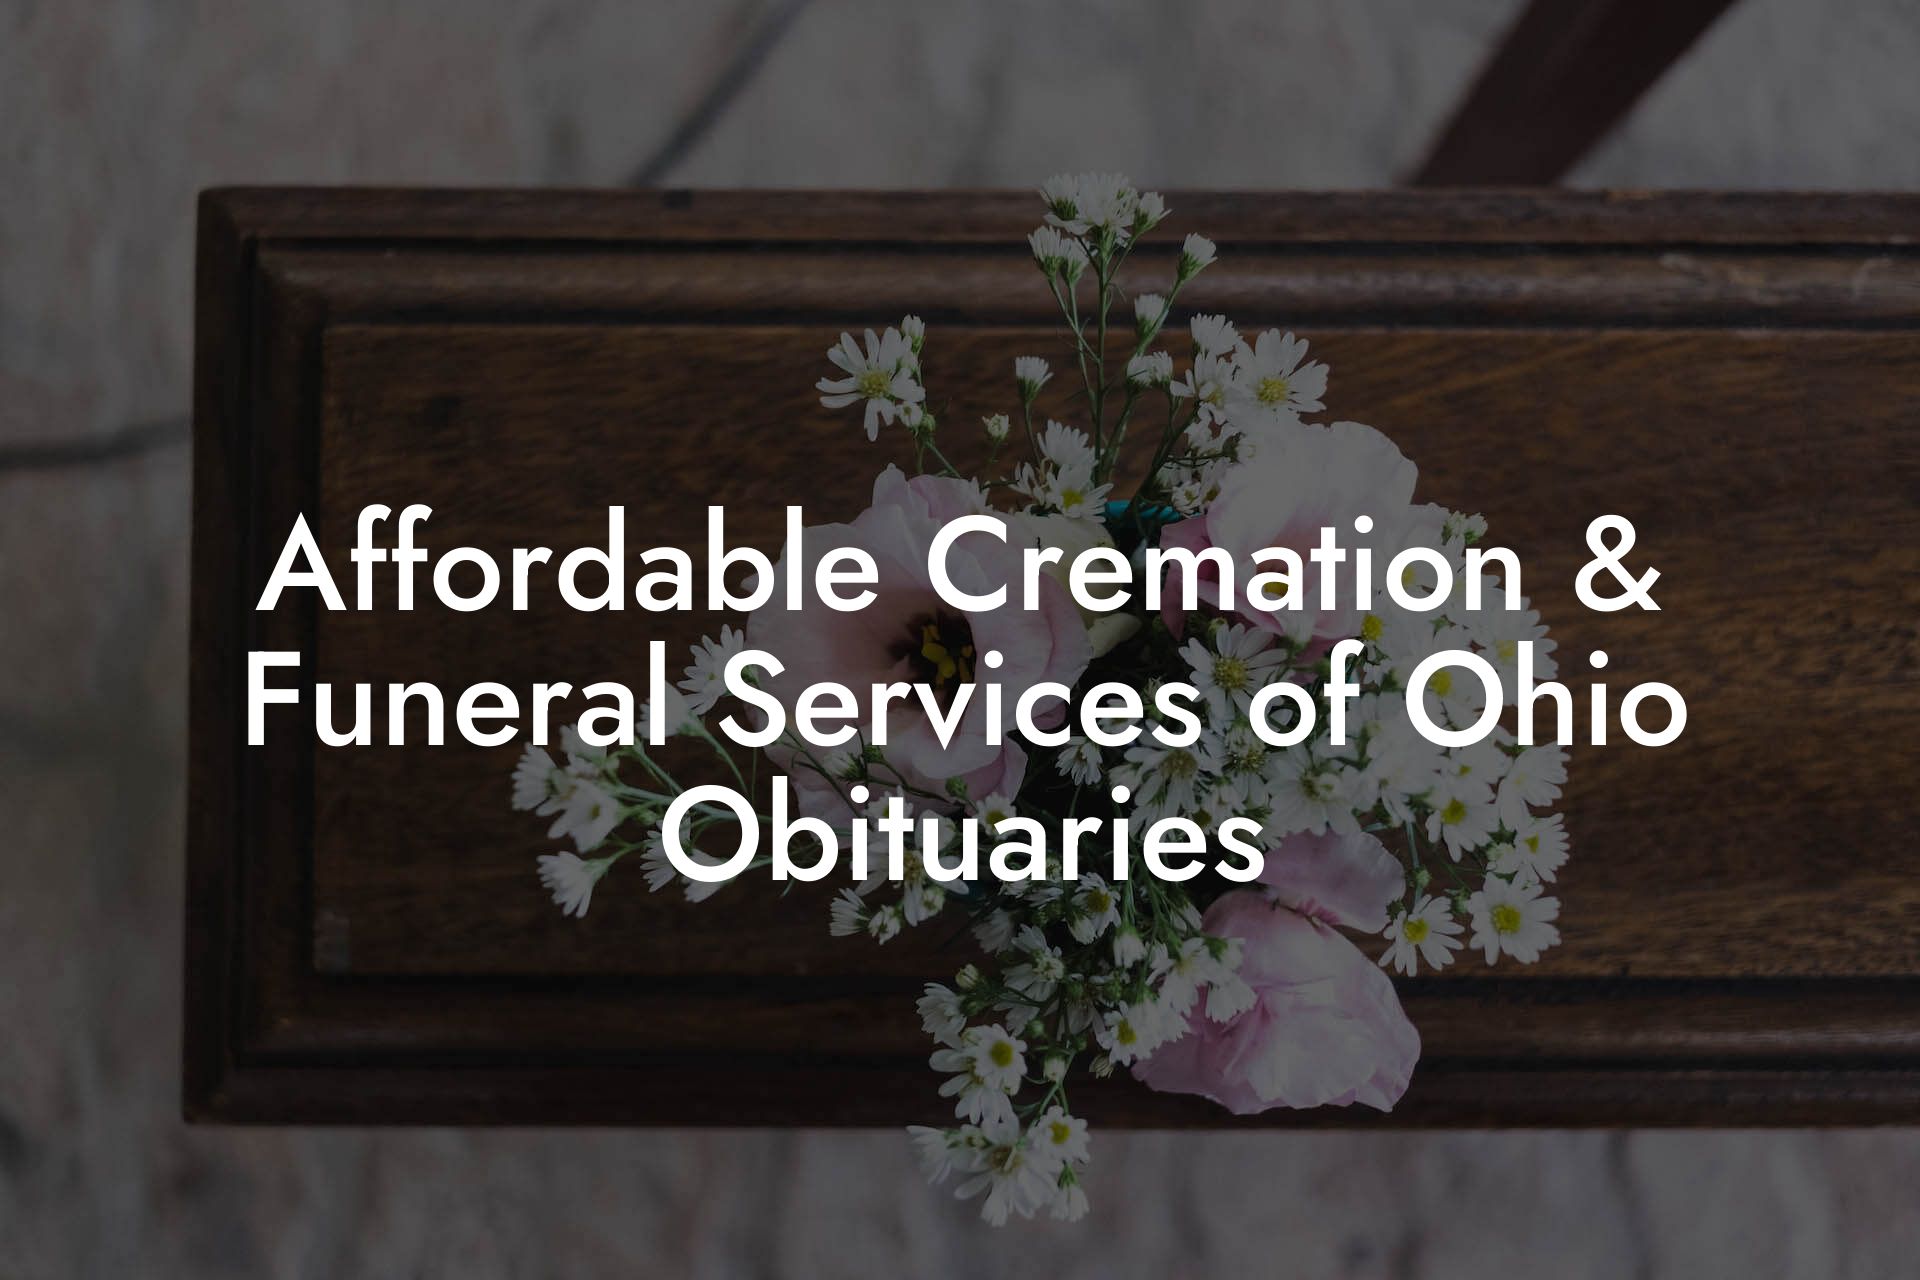 Affordable Cremation & Funeral Services of Ohio Obituaries